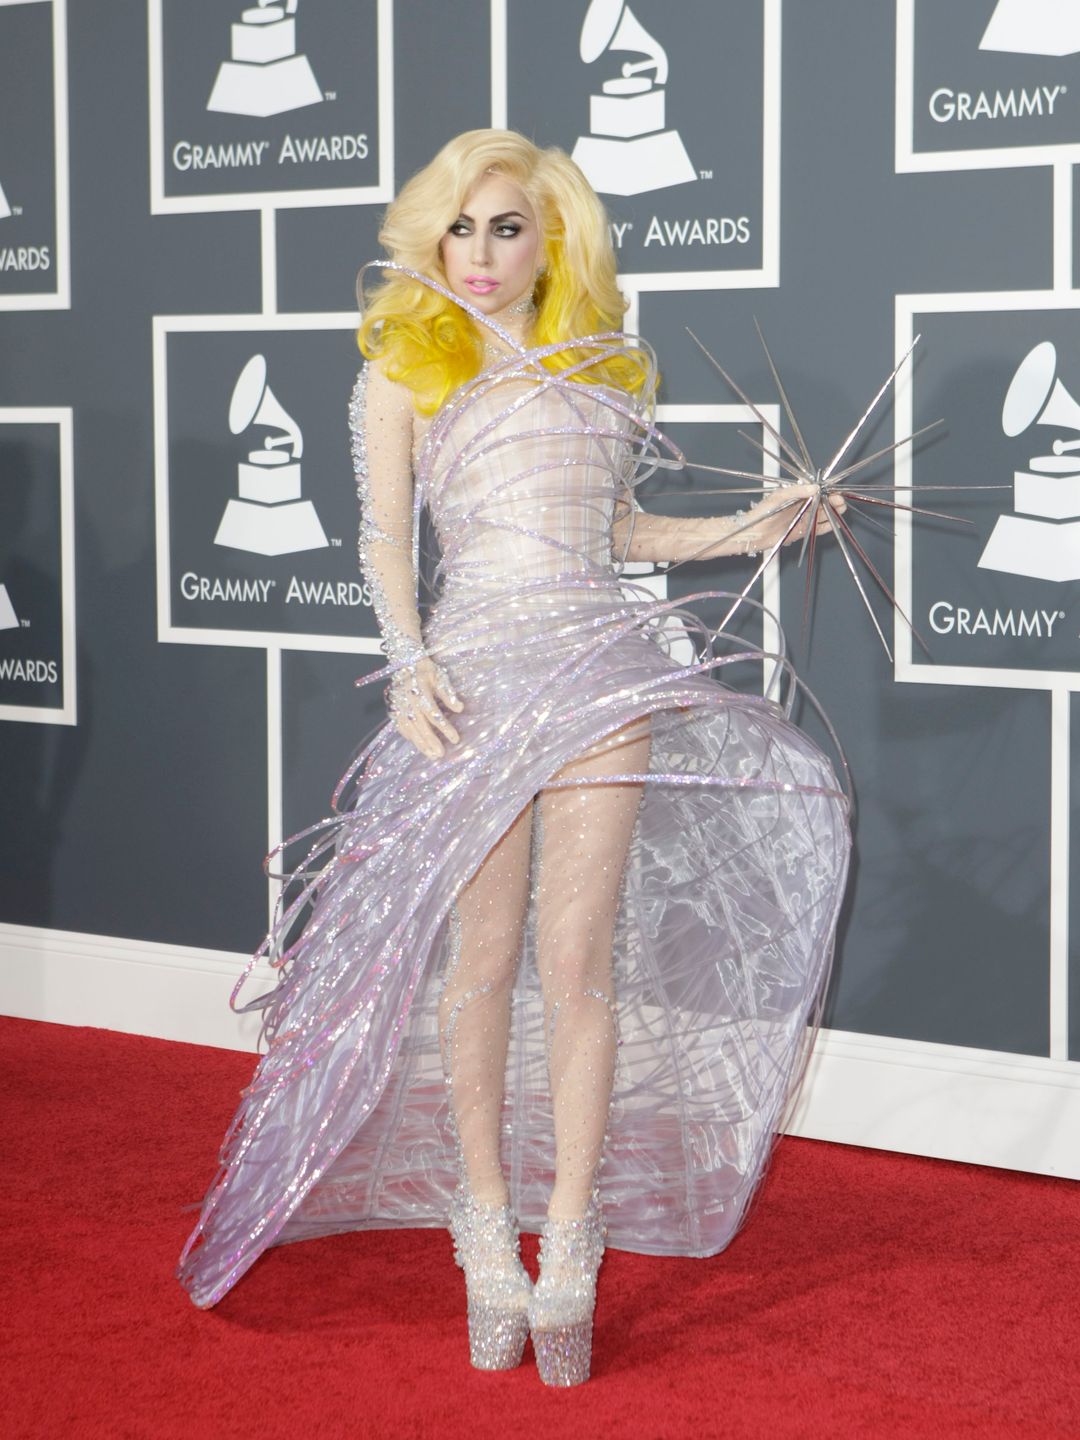 Lady Gaga wears a light up gown and yellow hair on the 2010 Grammy Awards red carpet